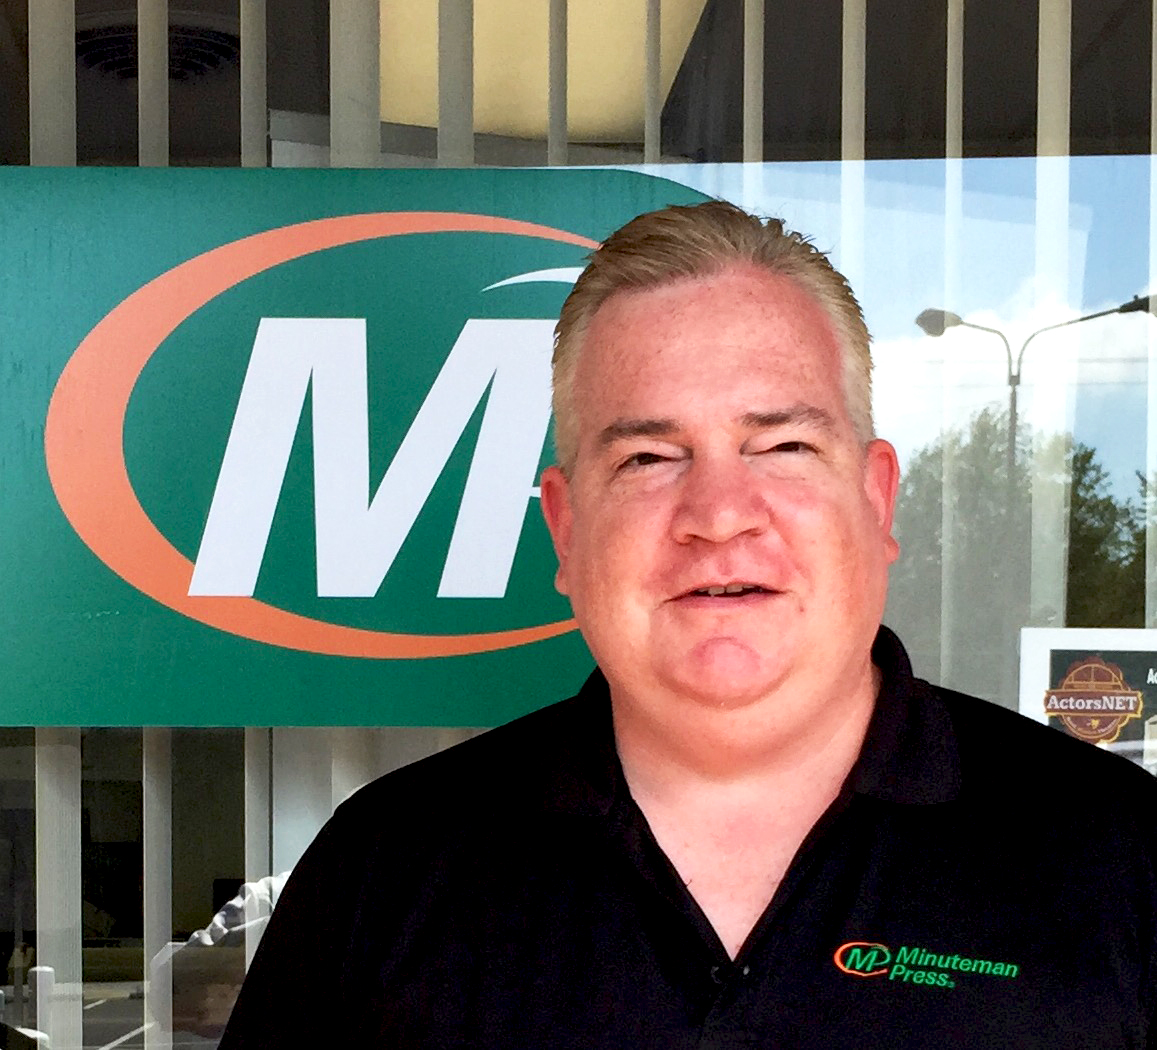 John Stranford now owns two Minuteman Press franchises in Pennsylvania - Morrisville, PA (2015) and Newtown, PA (2016)